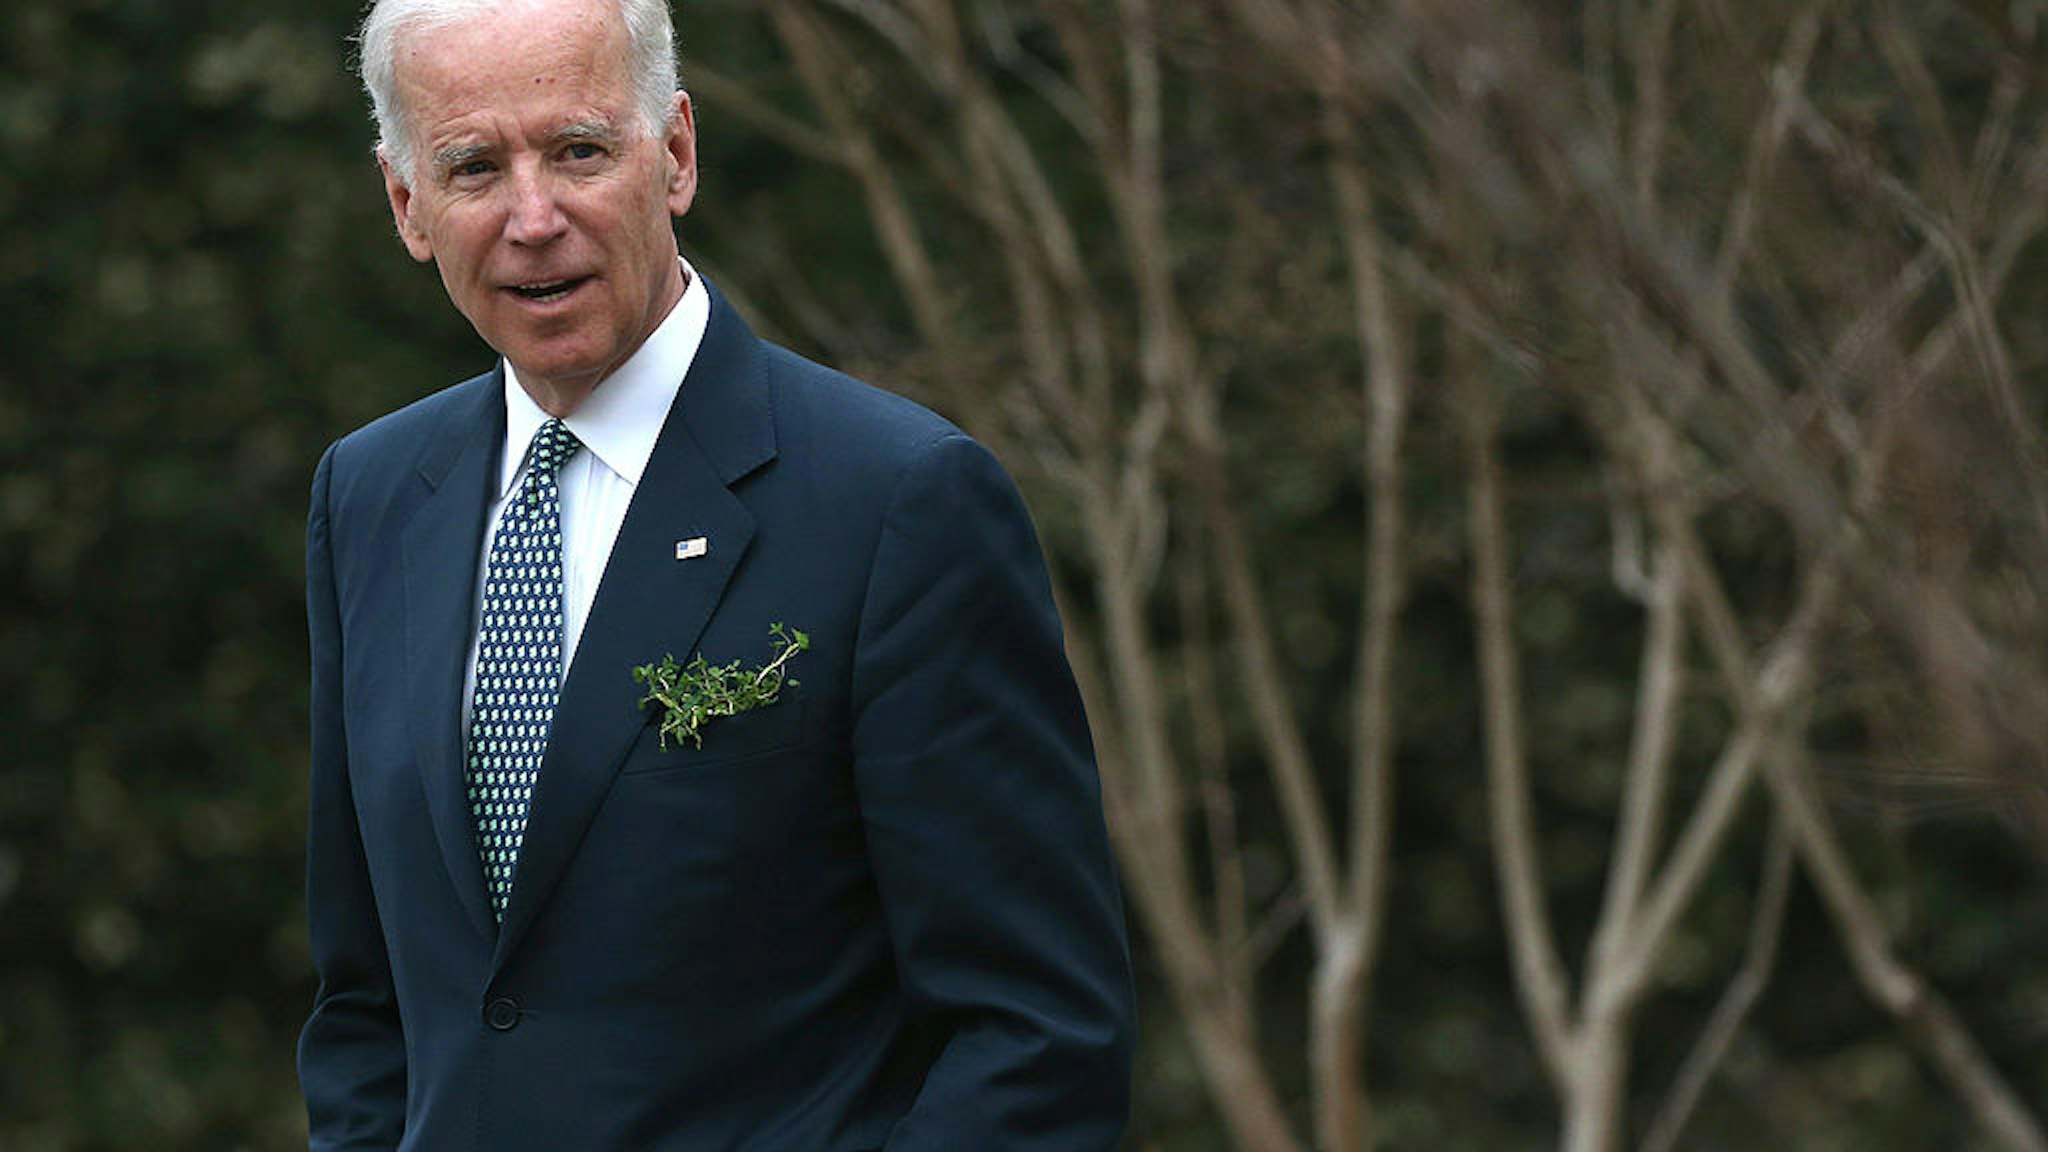 WASHINGTON, DC - MARCH 14: Vice President Joseph Biden waits for the arrival of Prime Minister Enda Kenny of Ireland, at the Naval Observatory, on March 14, 2014 in Washington, DC. Vice President Biden hosted a breakfast for the Irish Prime Minister in honor of St. Patricks Day on Sunday.